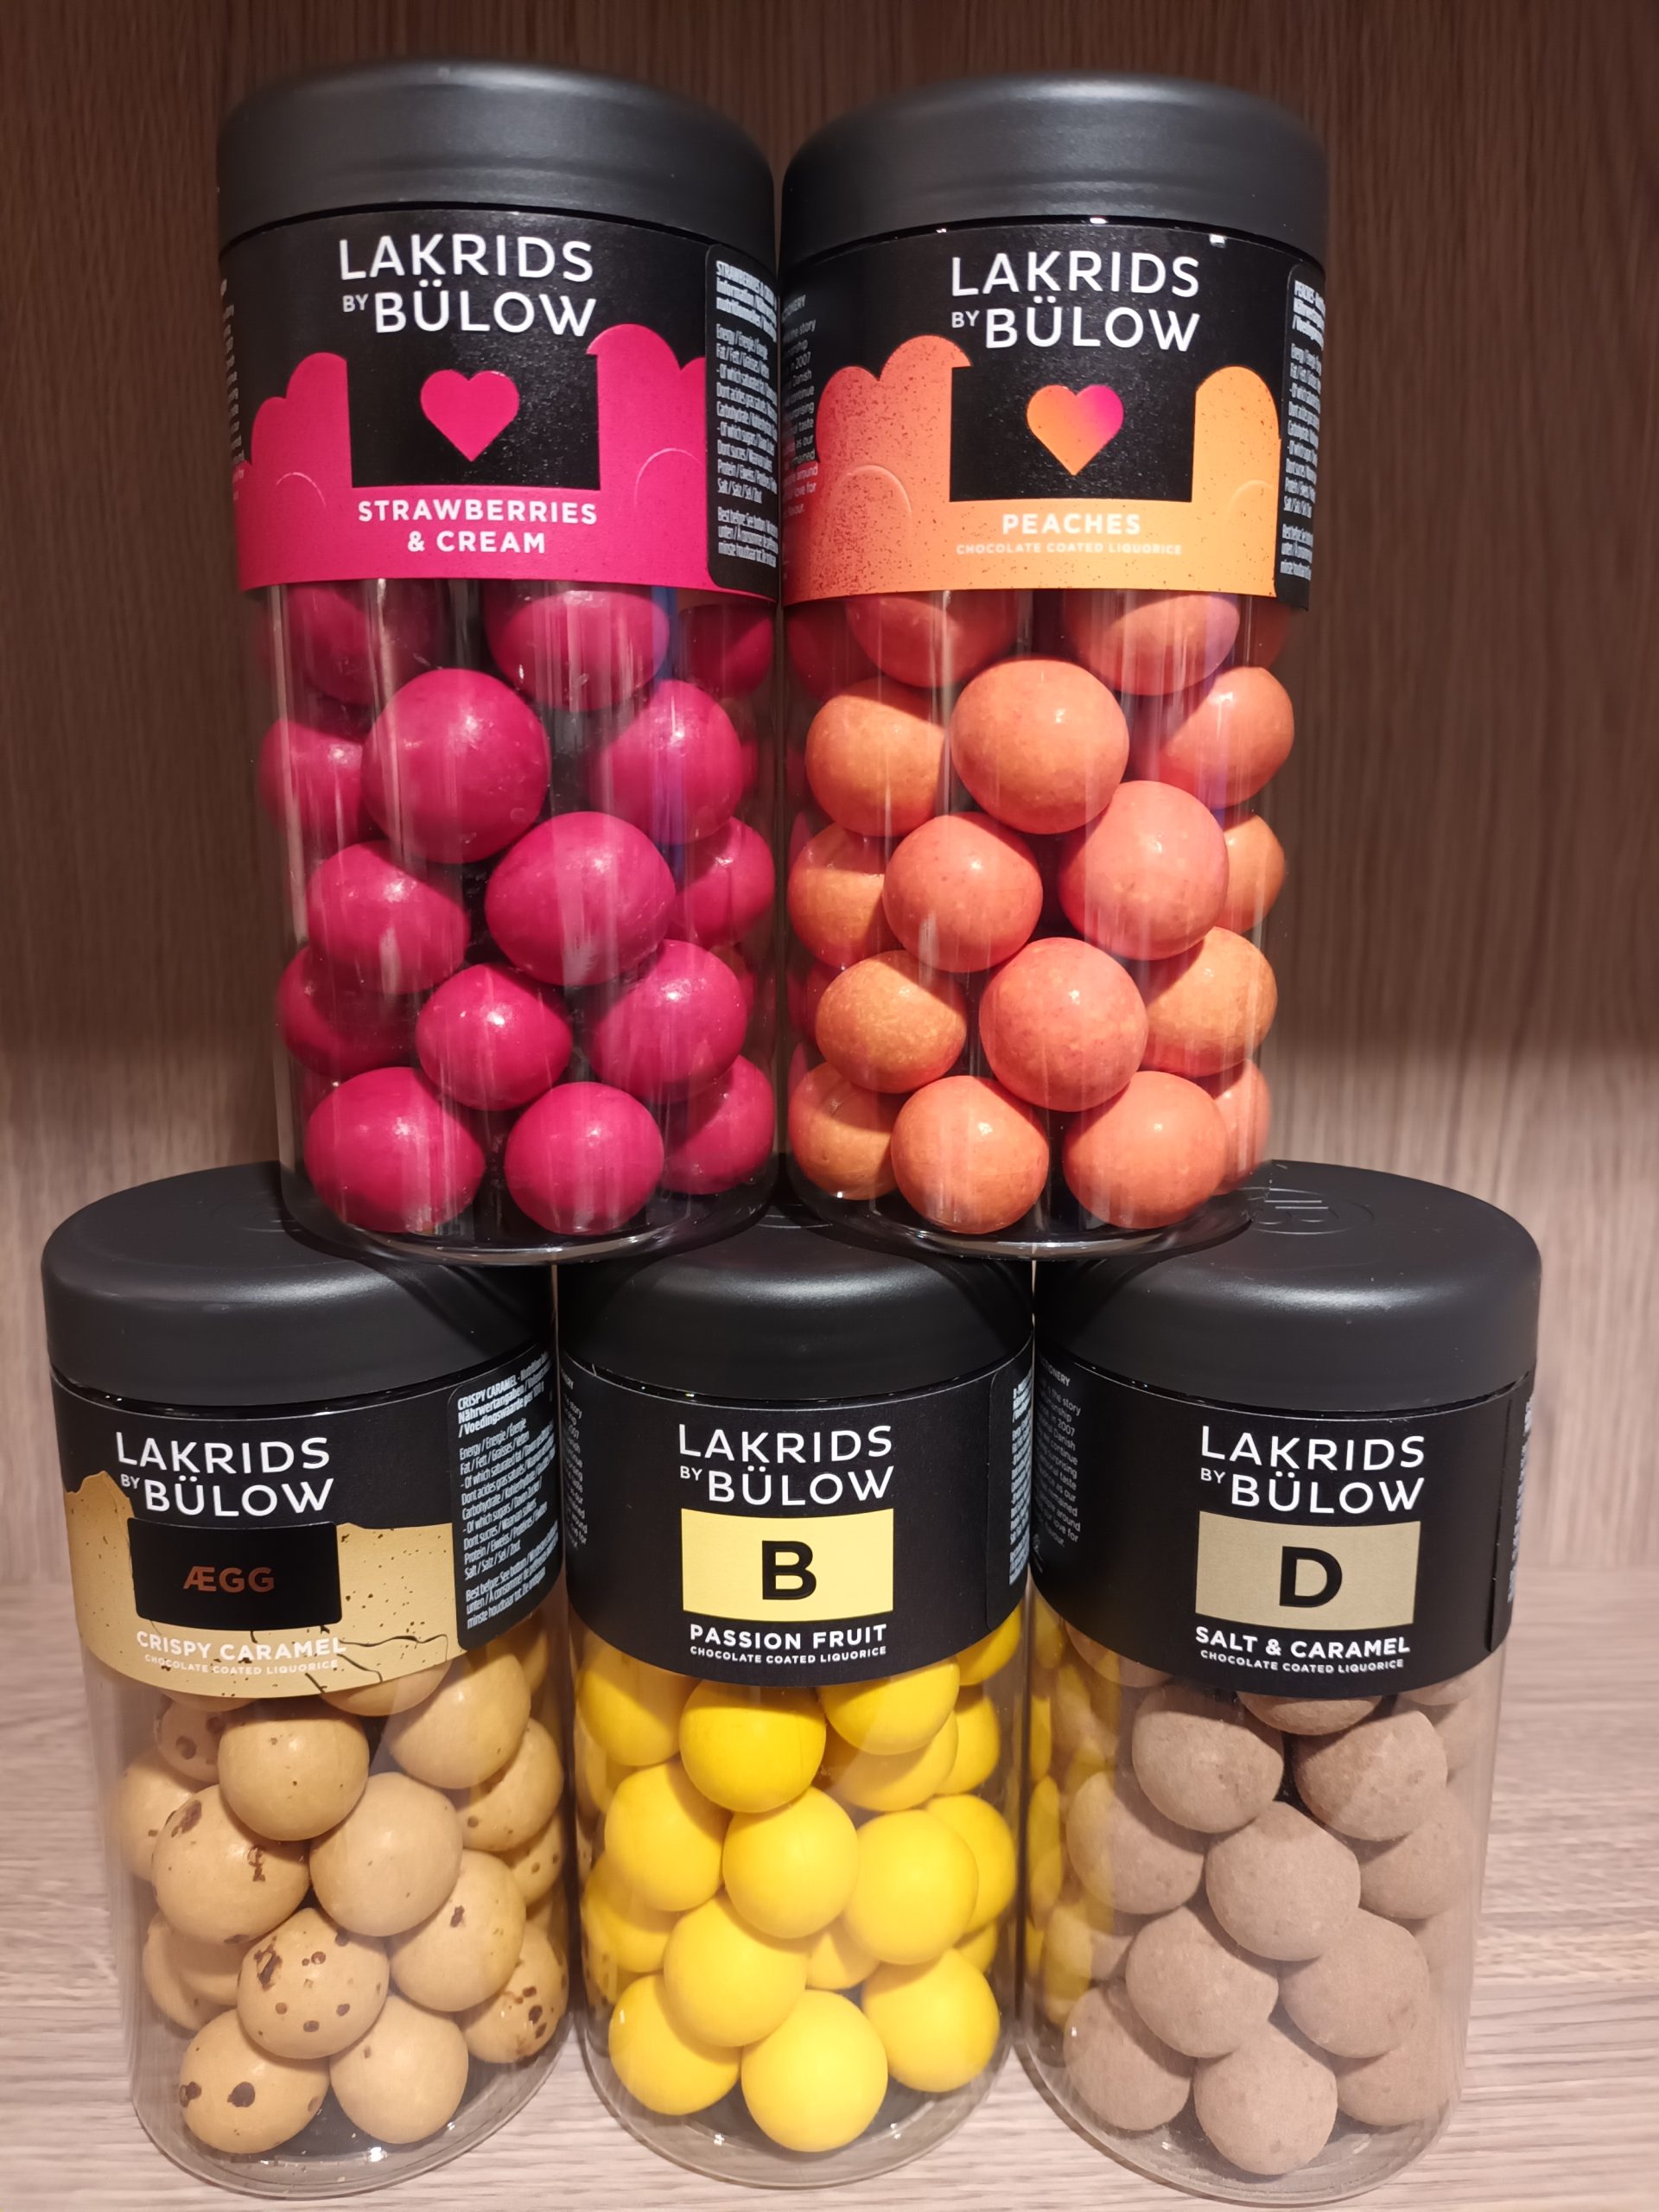 Lakrids by Bulow